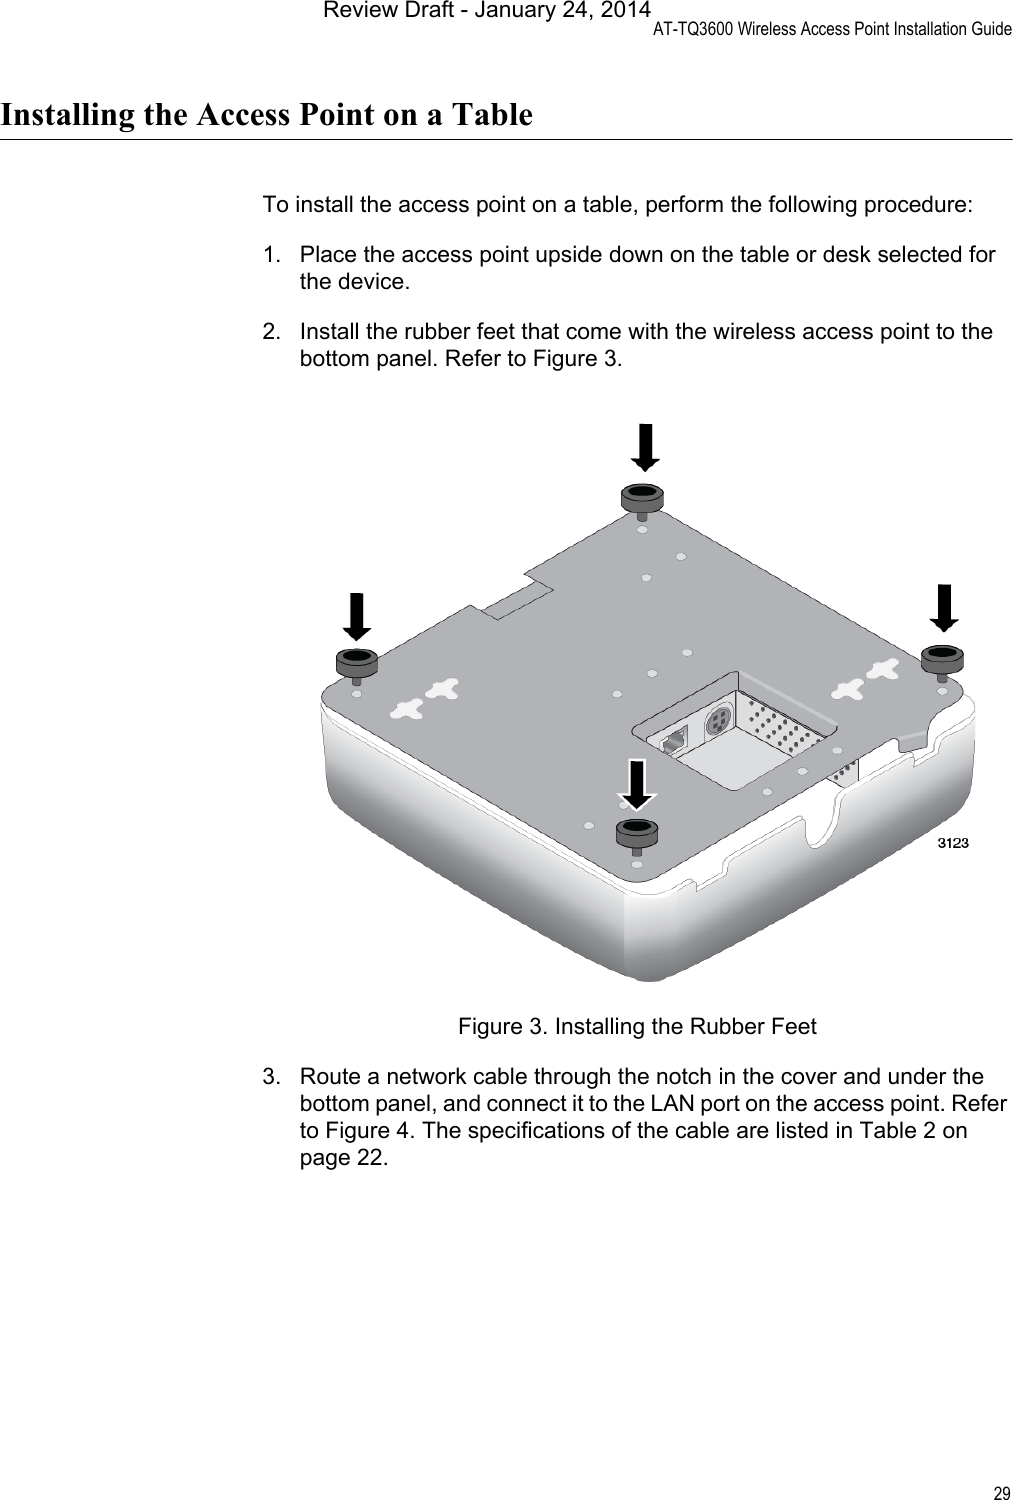 AT-TQ3600 Wireless Access Point Installation Guide29Installing the Access Point on a TableTo install the access point on a table, perform the following procedure:1. Place the access point upside down on the table or desk selected for the device.2. Install the rubber feet that come with the wireless access point to the bottom panel. Refer to Figure 3.Figure 3. Installing the Rubber Feet3. Route a network cable through the notch in the cover and under the bottom panel, and connect it to the LAN port on the access point. Refer to Figure 4. The specifications of the cable are listed in Table 2 on page 22.Review Draft - January 24, 2014